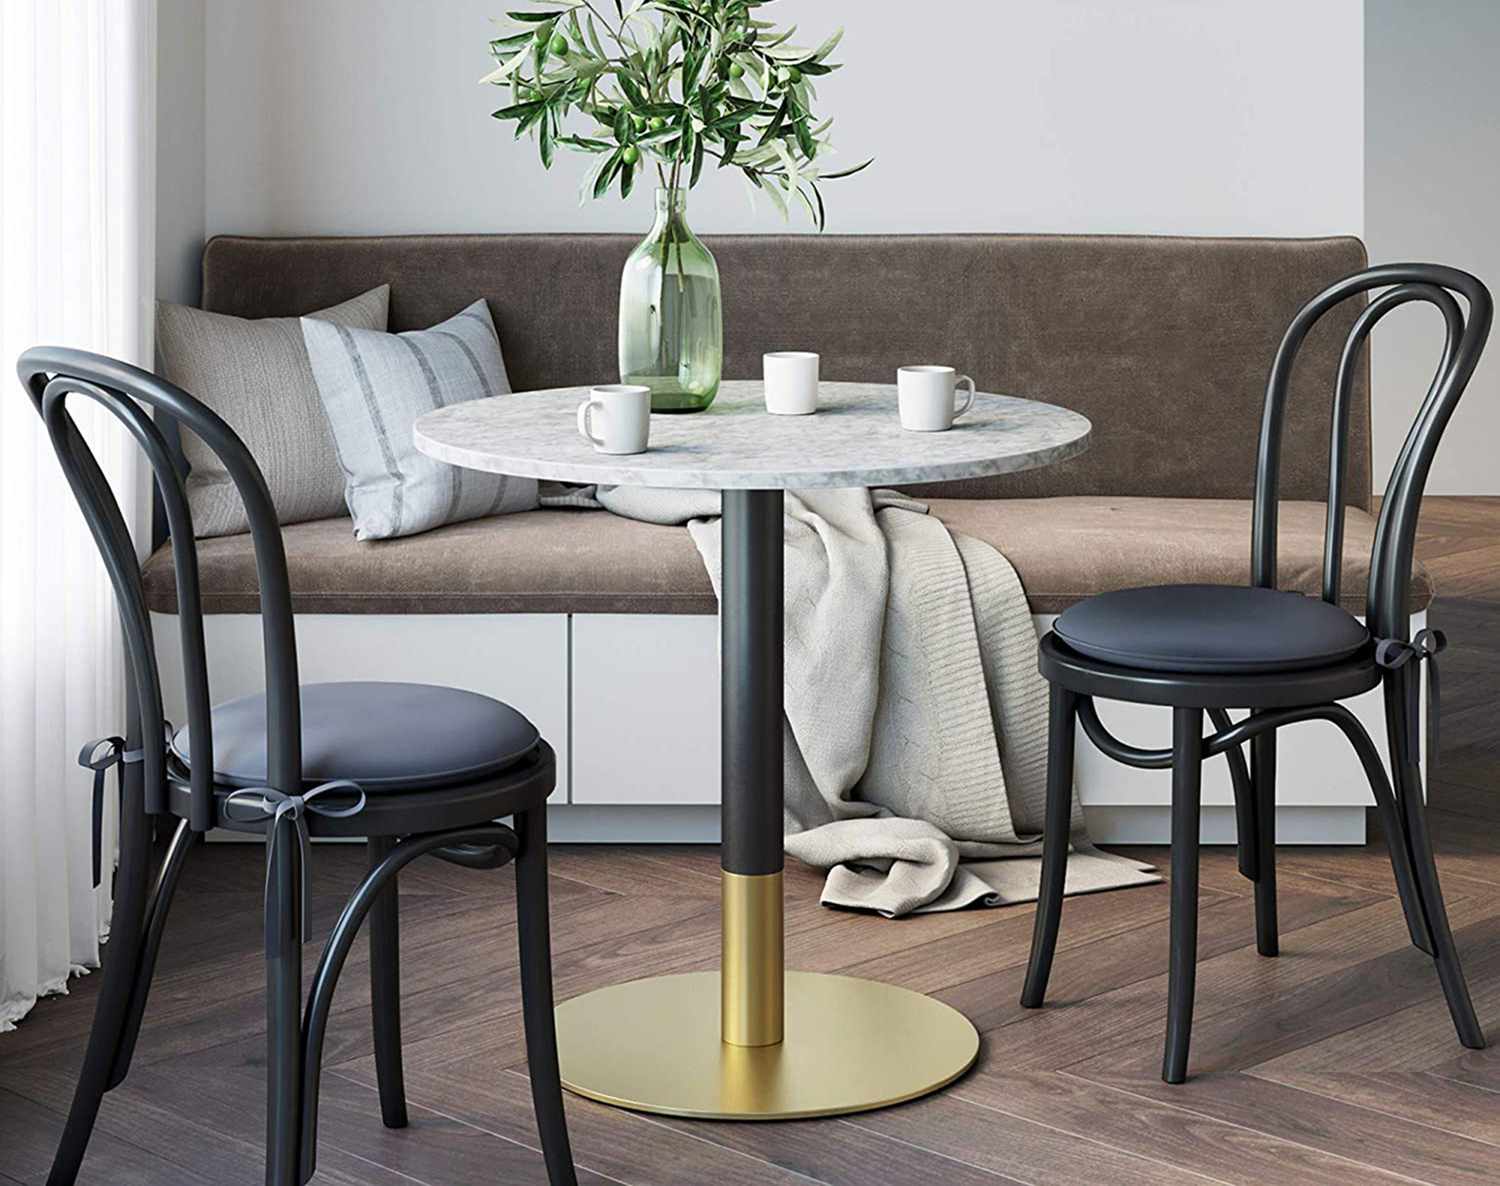 8 Best Dining Tables For Small Spaces, Dining Room Sets For Small Spaces